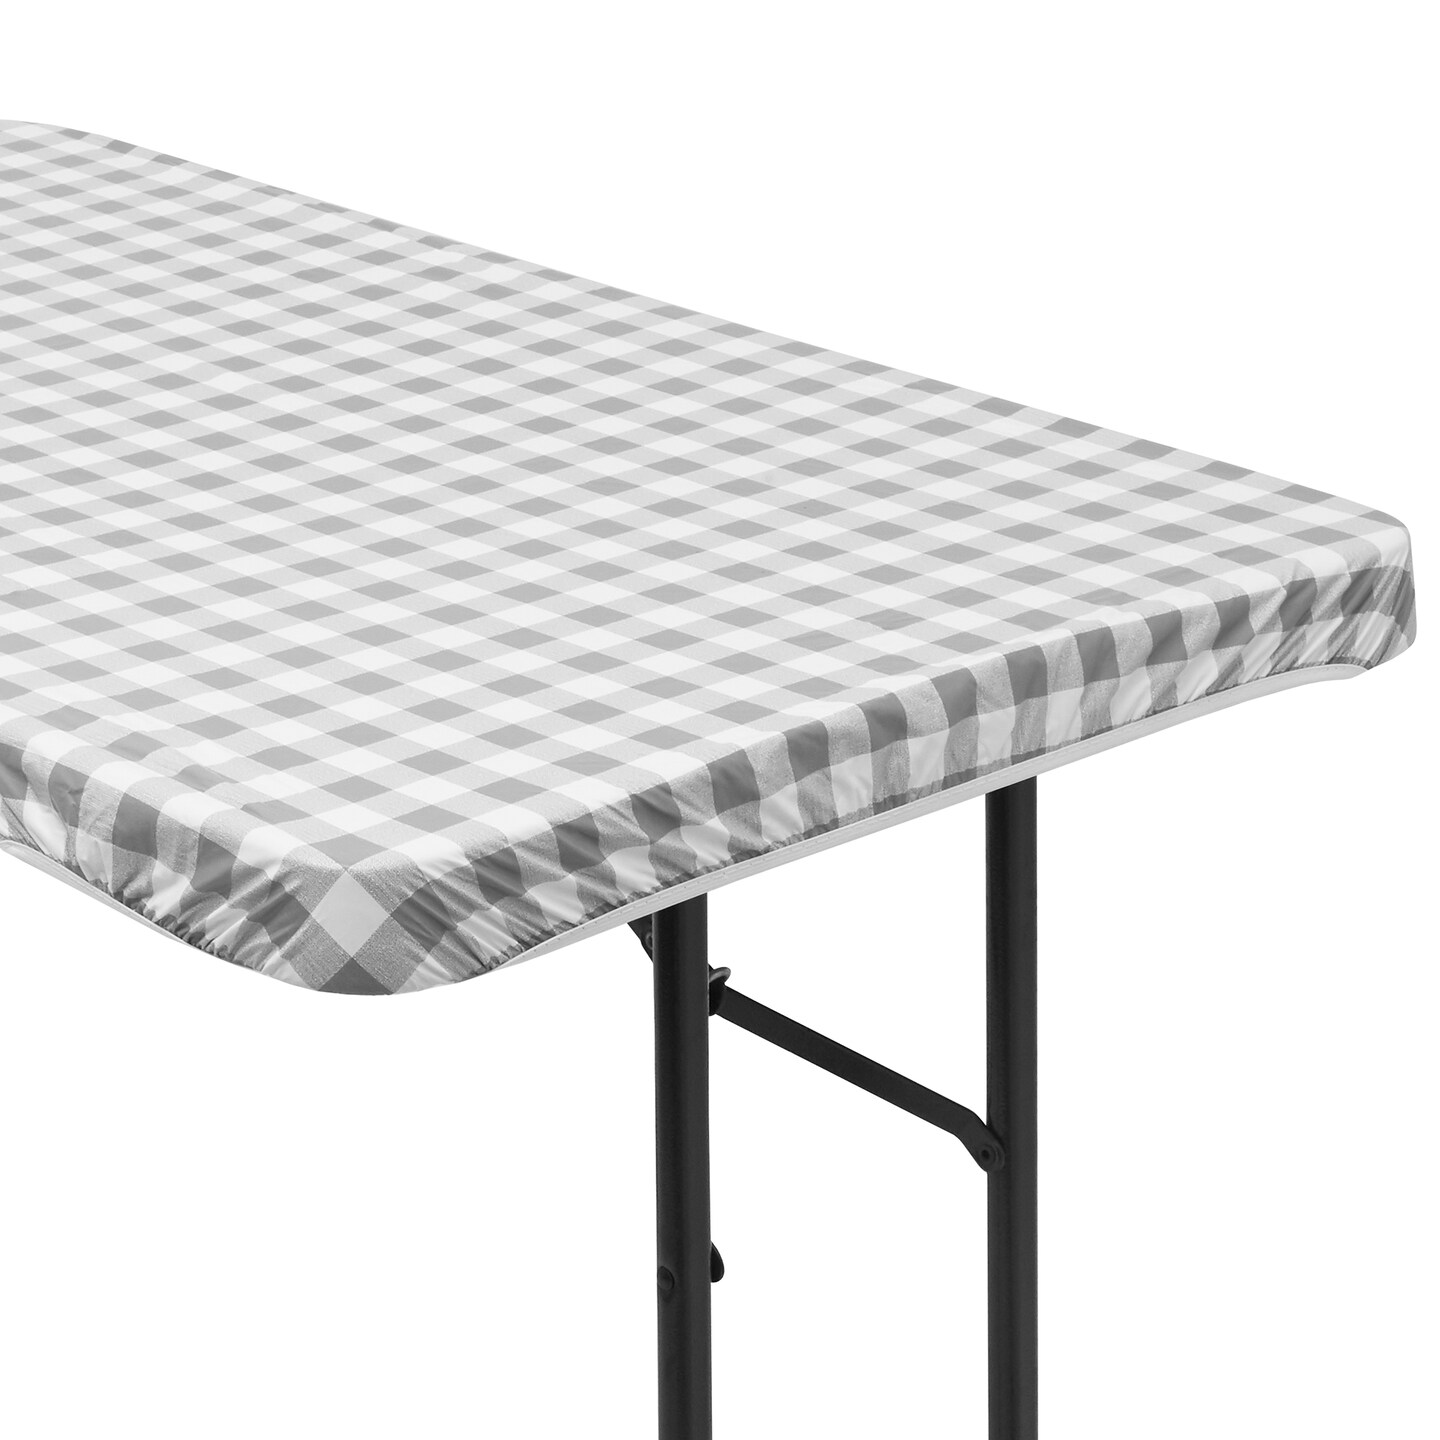 Lann's Linens Vinyl Tablecloth with Flannel Backing, Patterned - Fitted Waterproof Table Cover for Indoor / Outdoor Use